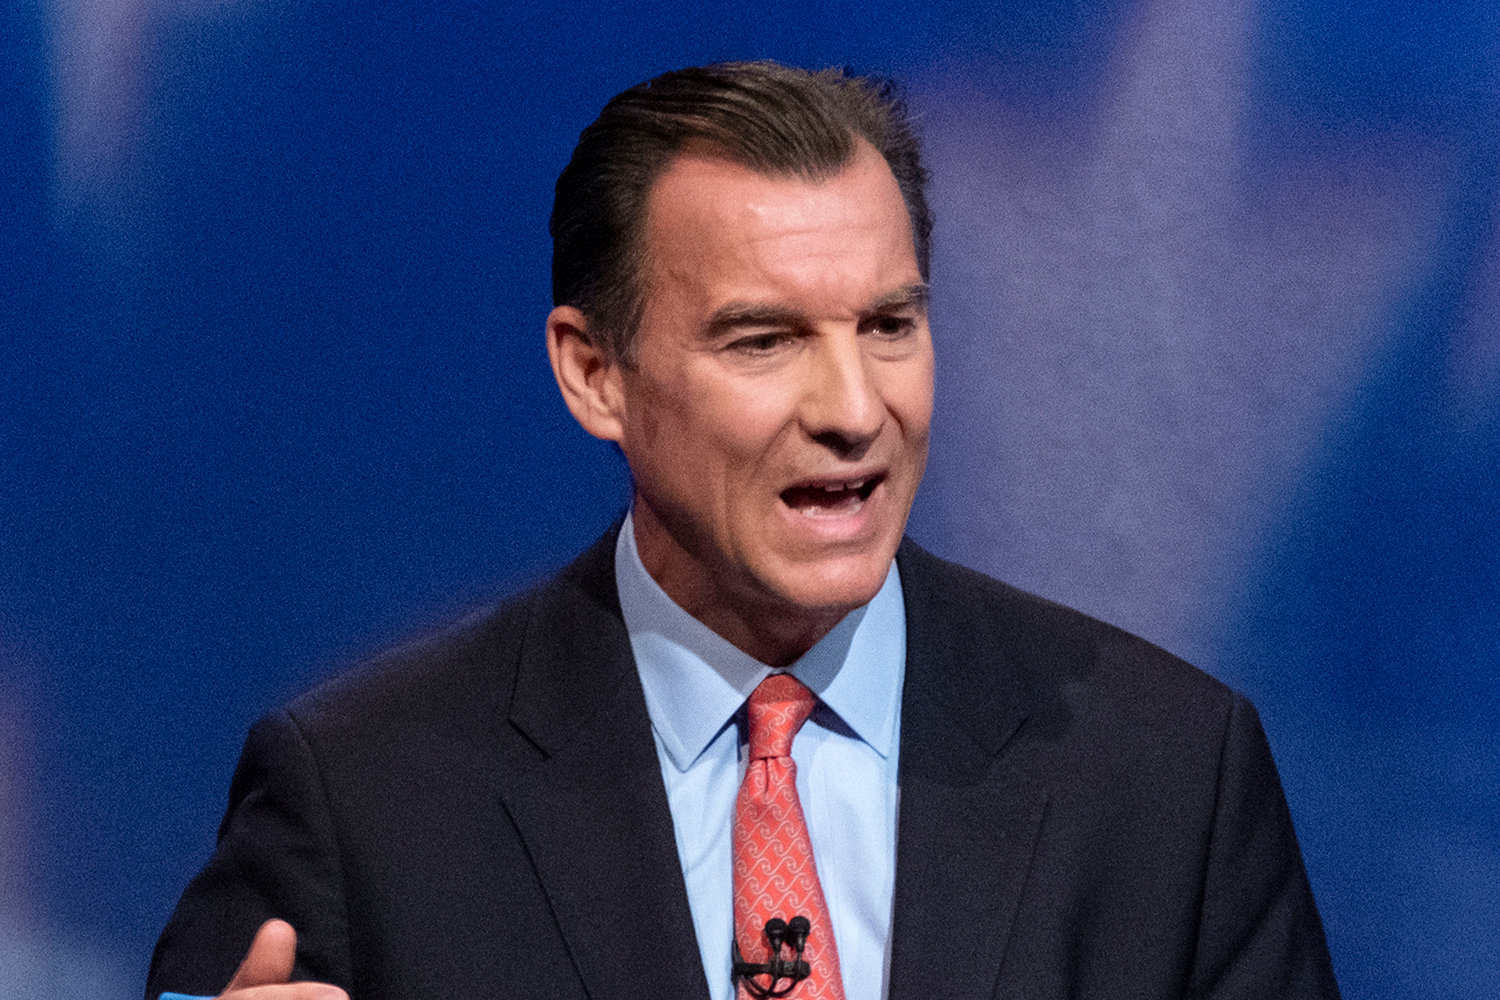 FILE - Rep. Tom Suozzi, D-N.Y., answers a question during a debate before the New York governor primary, at the studios of WNBC4-TV, June 16, 2022, in New York. New Yorkers are casting votes in a governor's race Tuesday, June 28, 2022, that for the first time in a decade does not include the name "Cuomo" at the top of the ticket. (Craig Ruttle/Pool via AP, File)